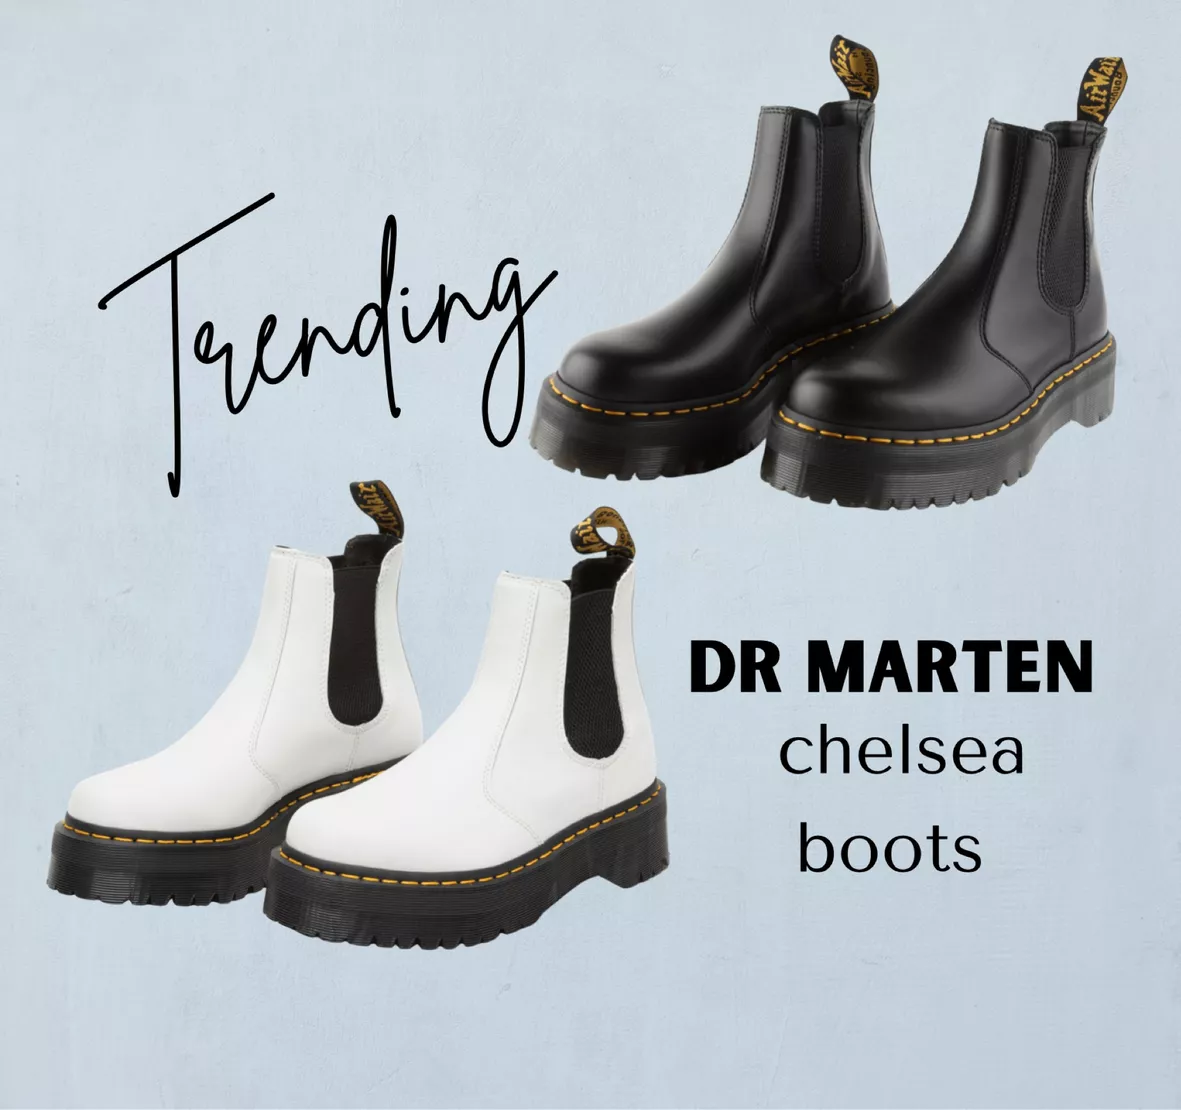 dr martens white boots outfit